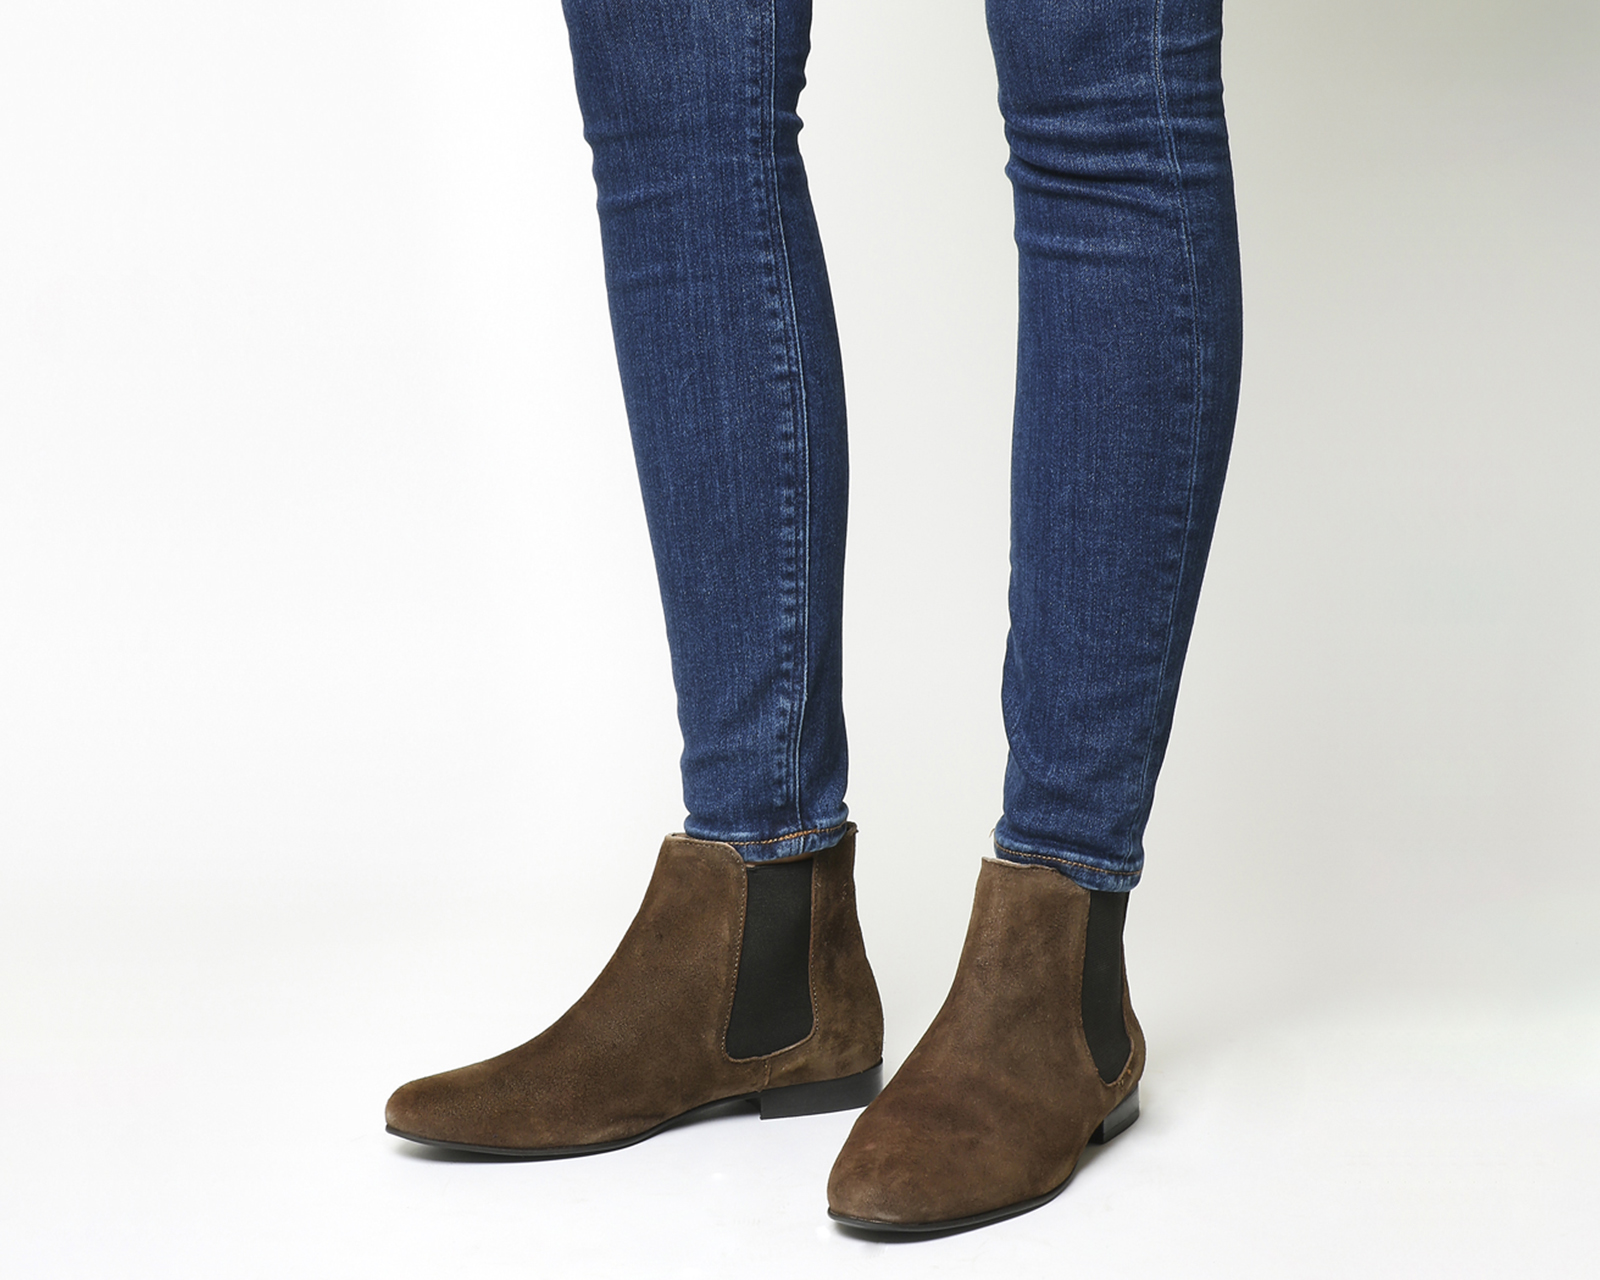 OFFICELincoln Chelsea BootsBrown Suede